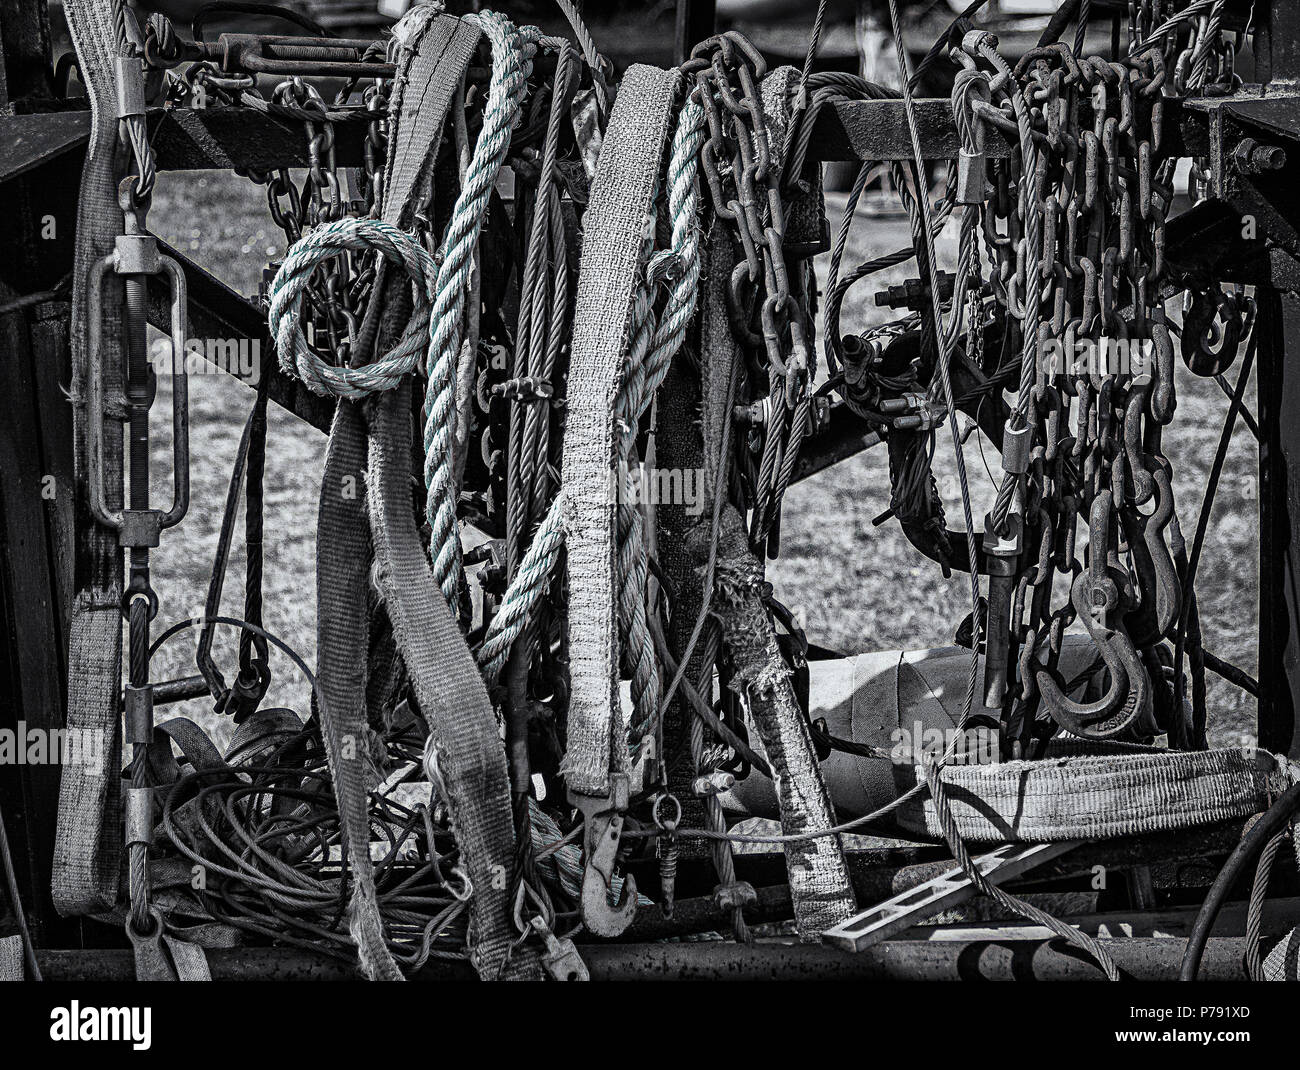 The lifting devices hanged on a special rack Stock Photo